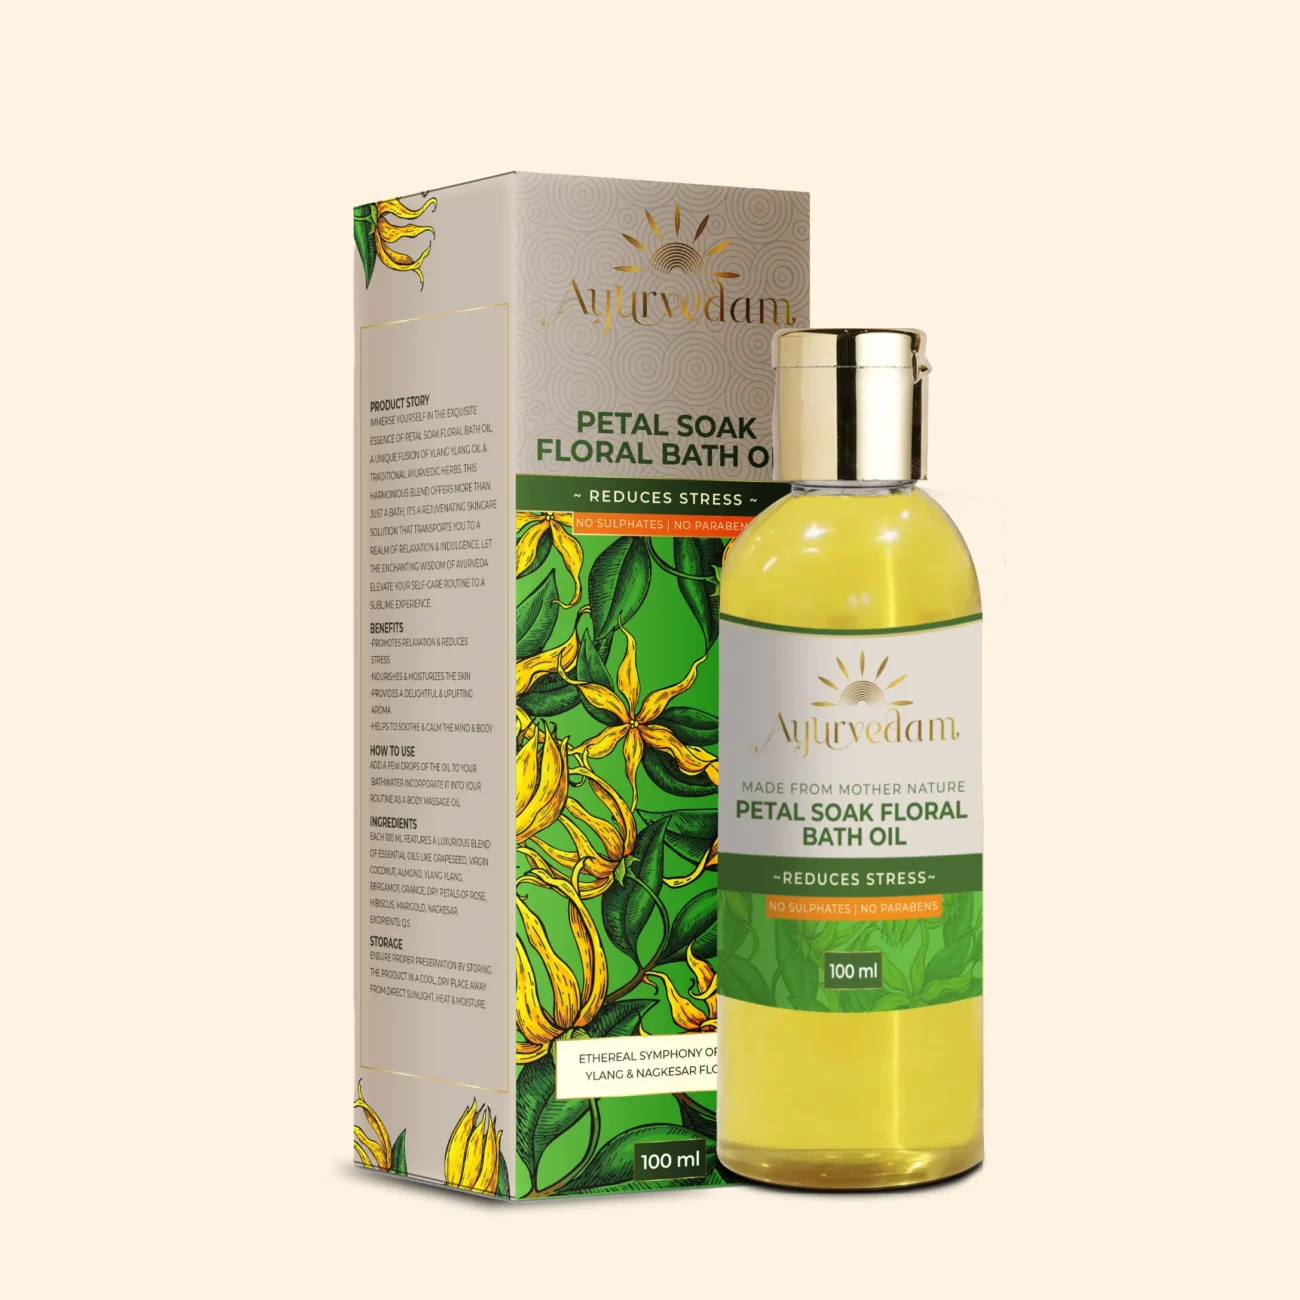 Petal Soak Floral Bath Oil, an ayurvedic body massage oil along with its package by Ayurvedam